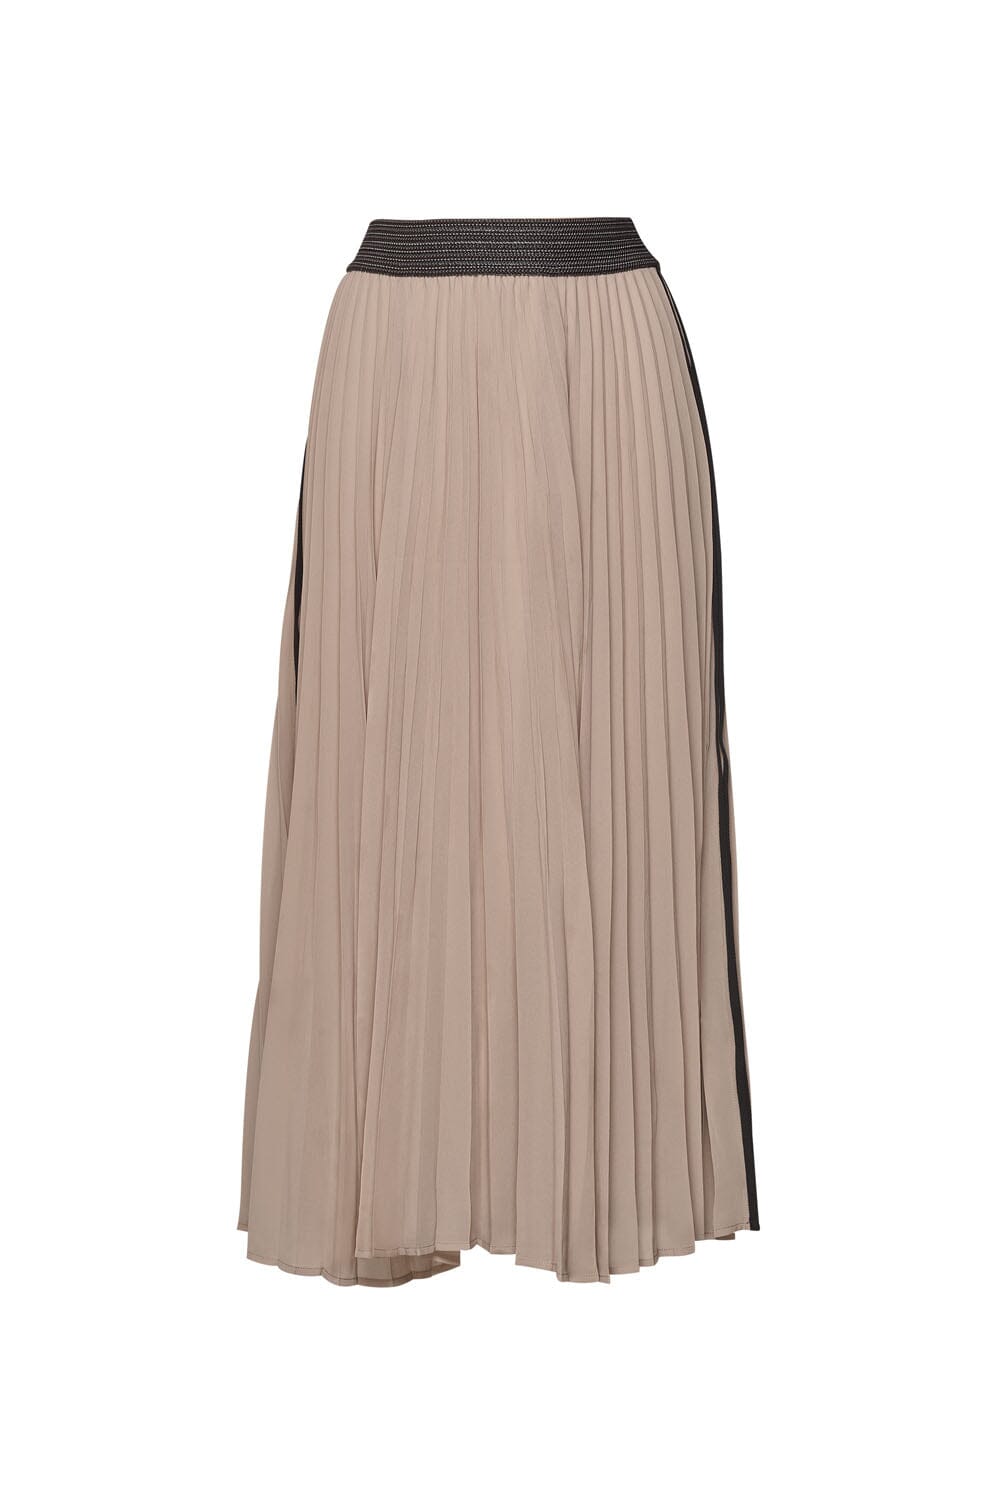 JUST PLEAT IT SKIRT TAUPE